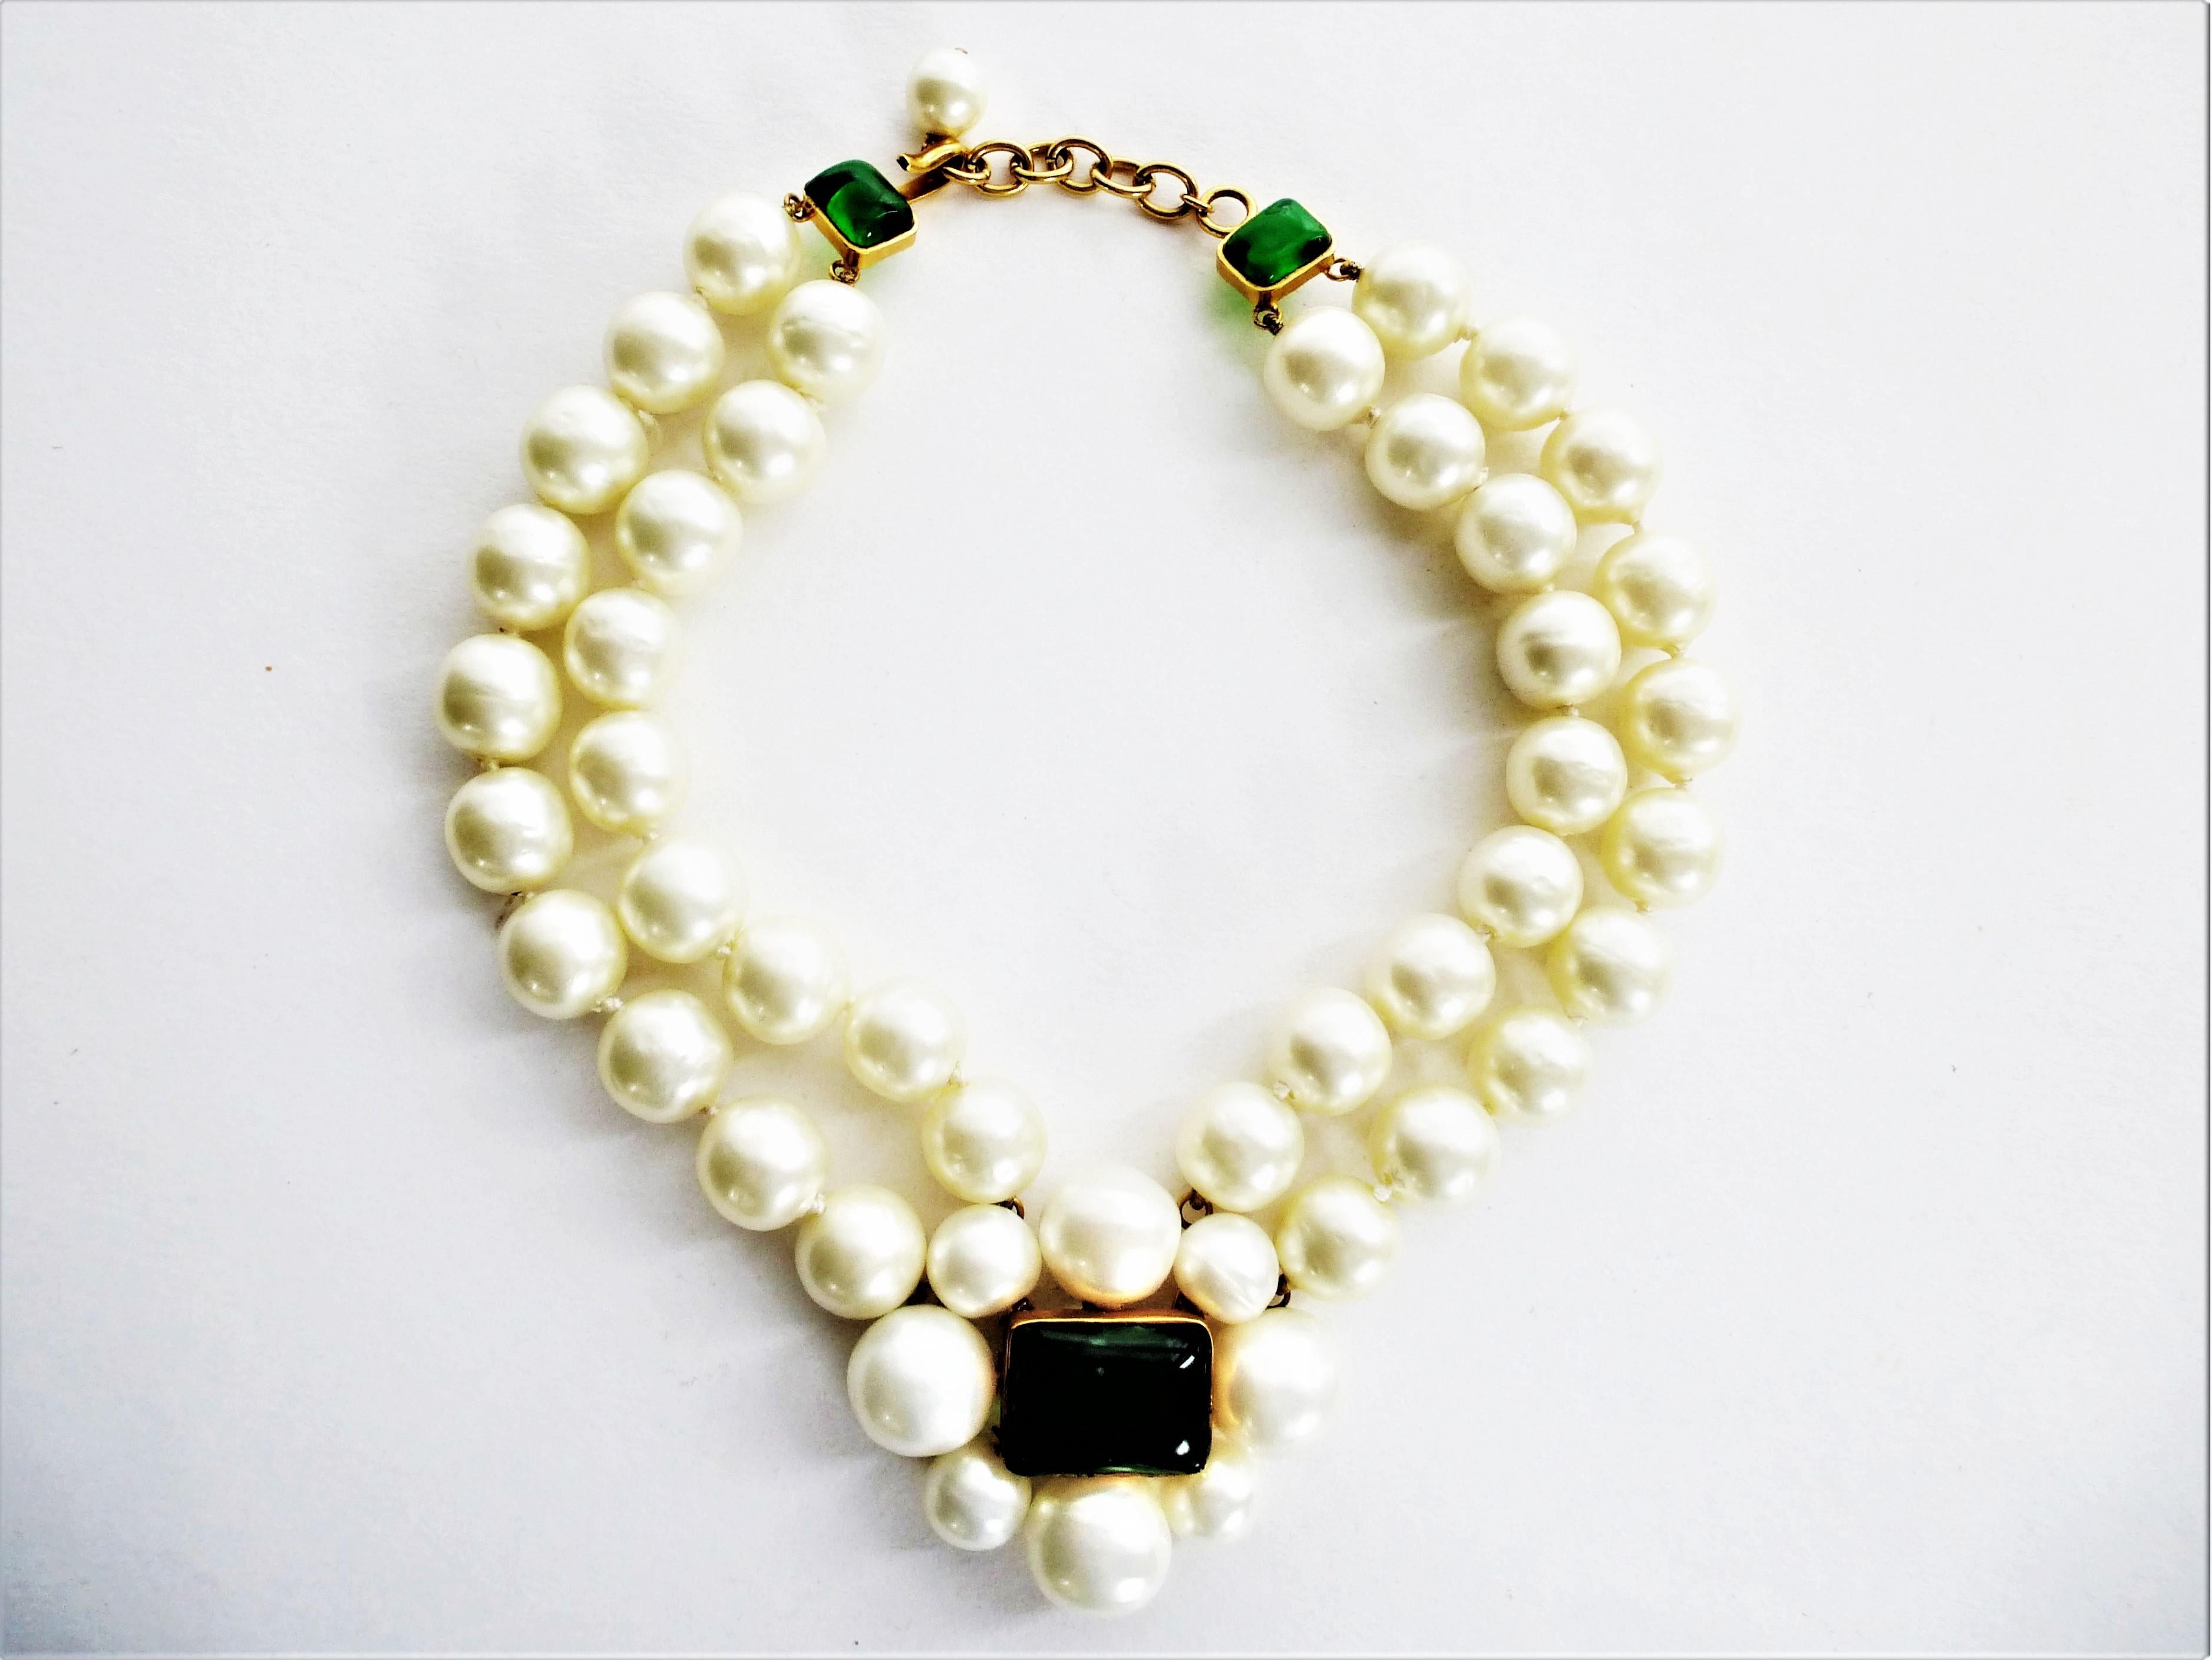 CHANEL collier with pearls and Gripoix signed 97A - 1997 Autumn 2